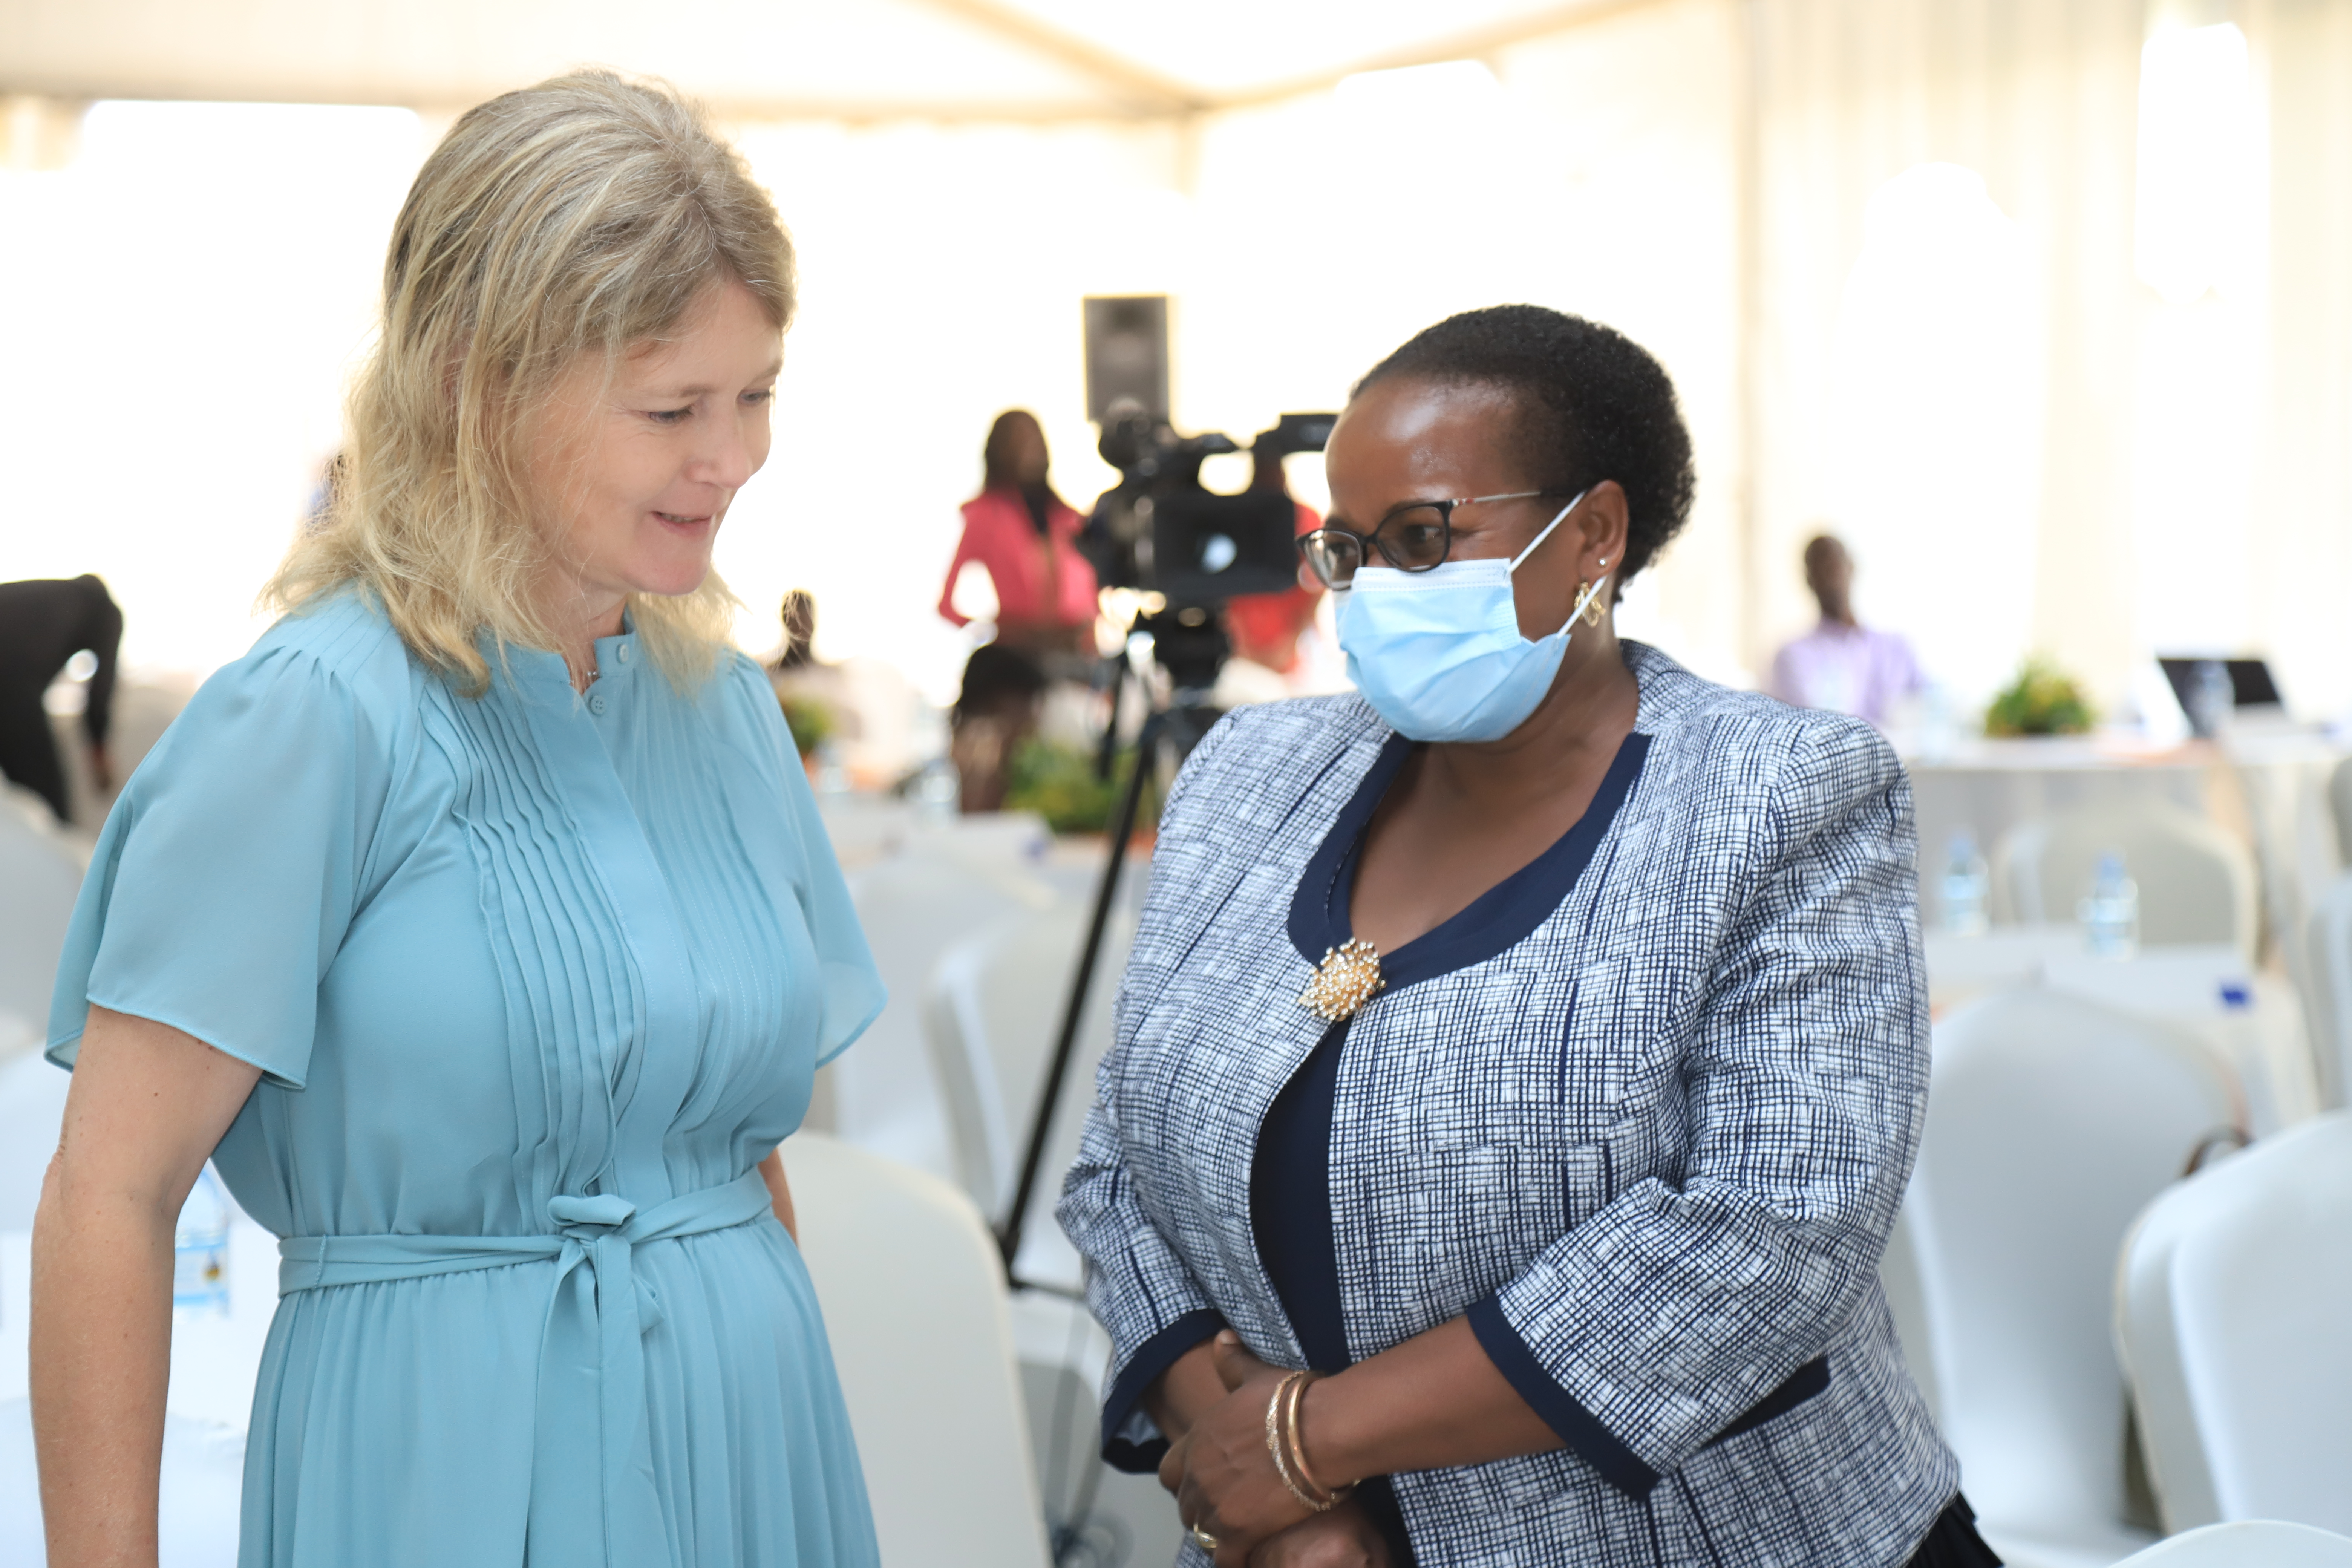 HE The Ambassador of Sweden in Uganda, Maria Hakansson,(left)  in conversation with Commissioner Angela Nakafeero (MGLSD) at the National Symposium 